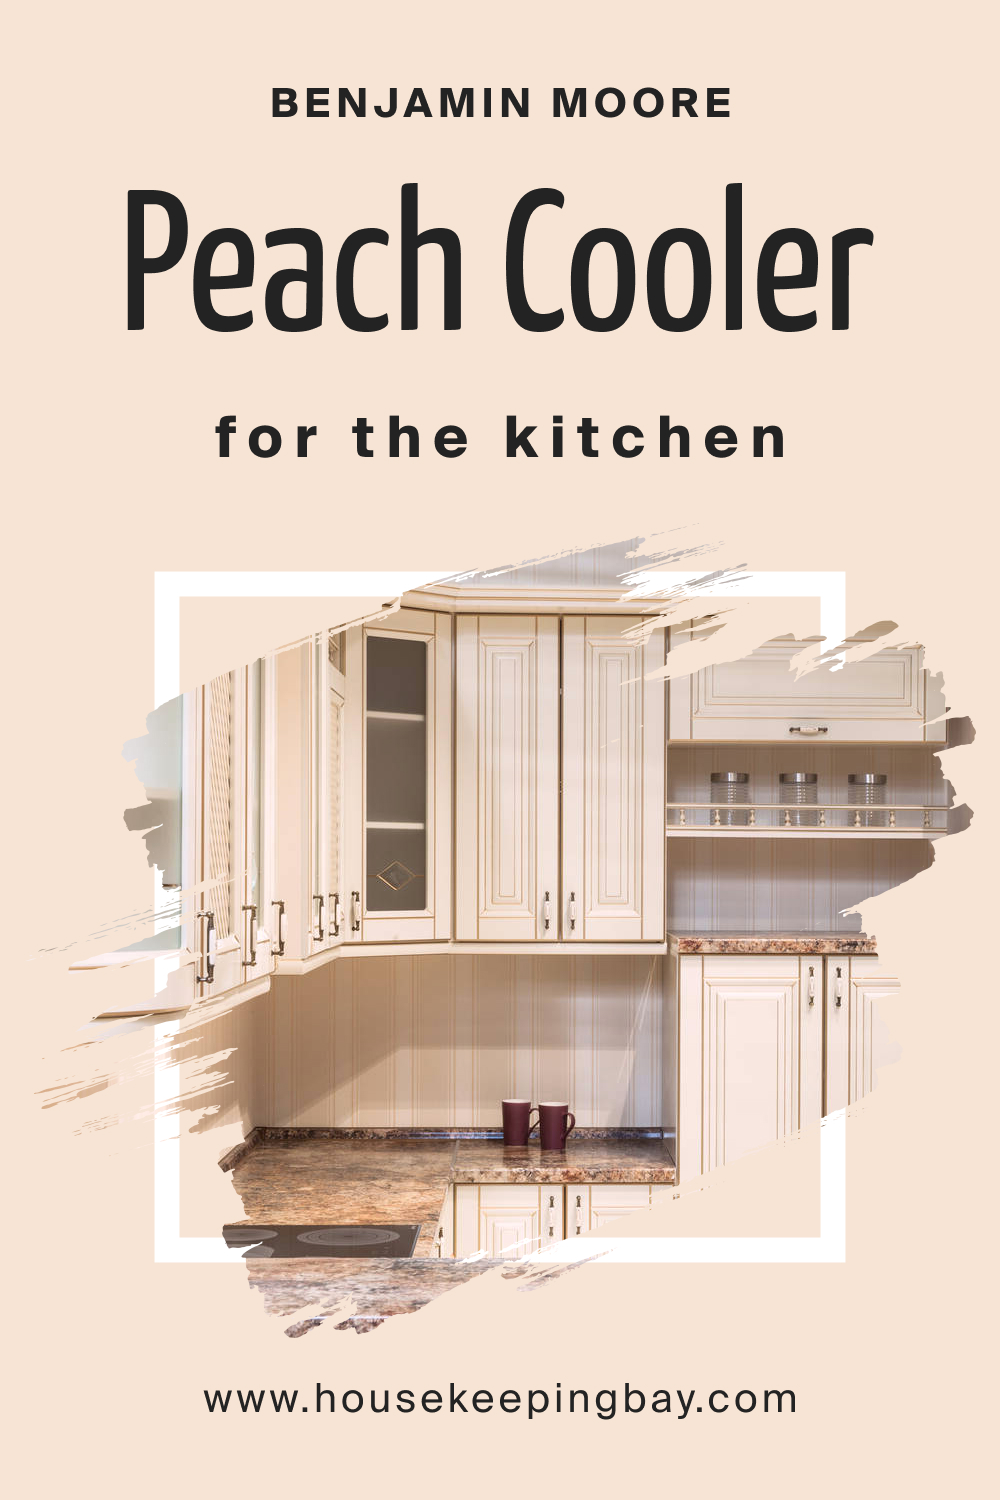 Benjamin Moore. Peach Cooler 022 for the Kitchen